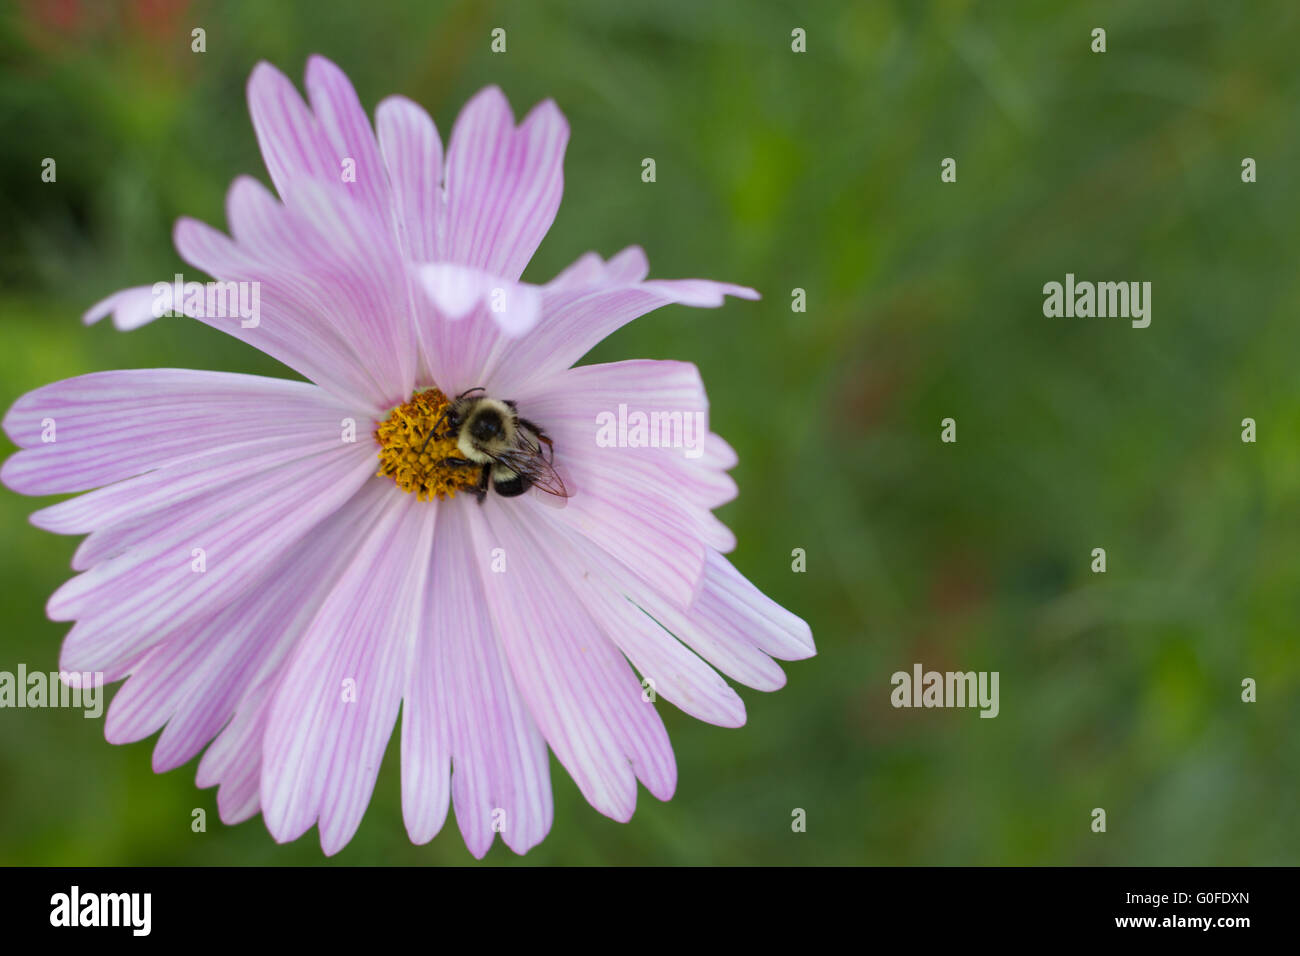 Bee on a flower, close-up. Stock Photo